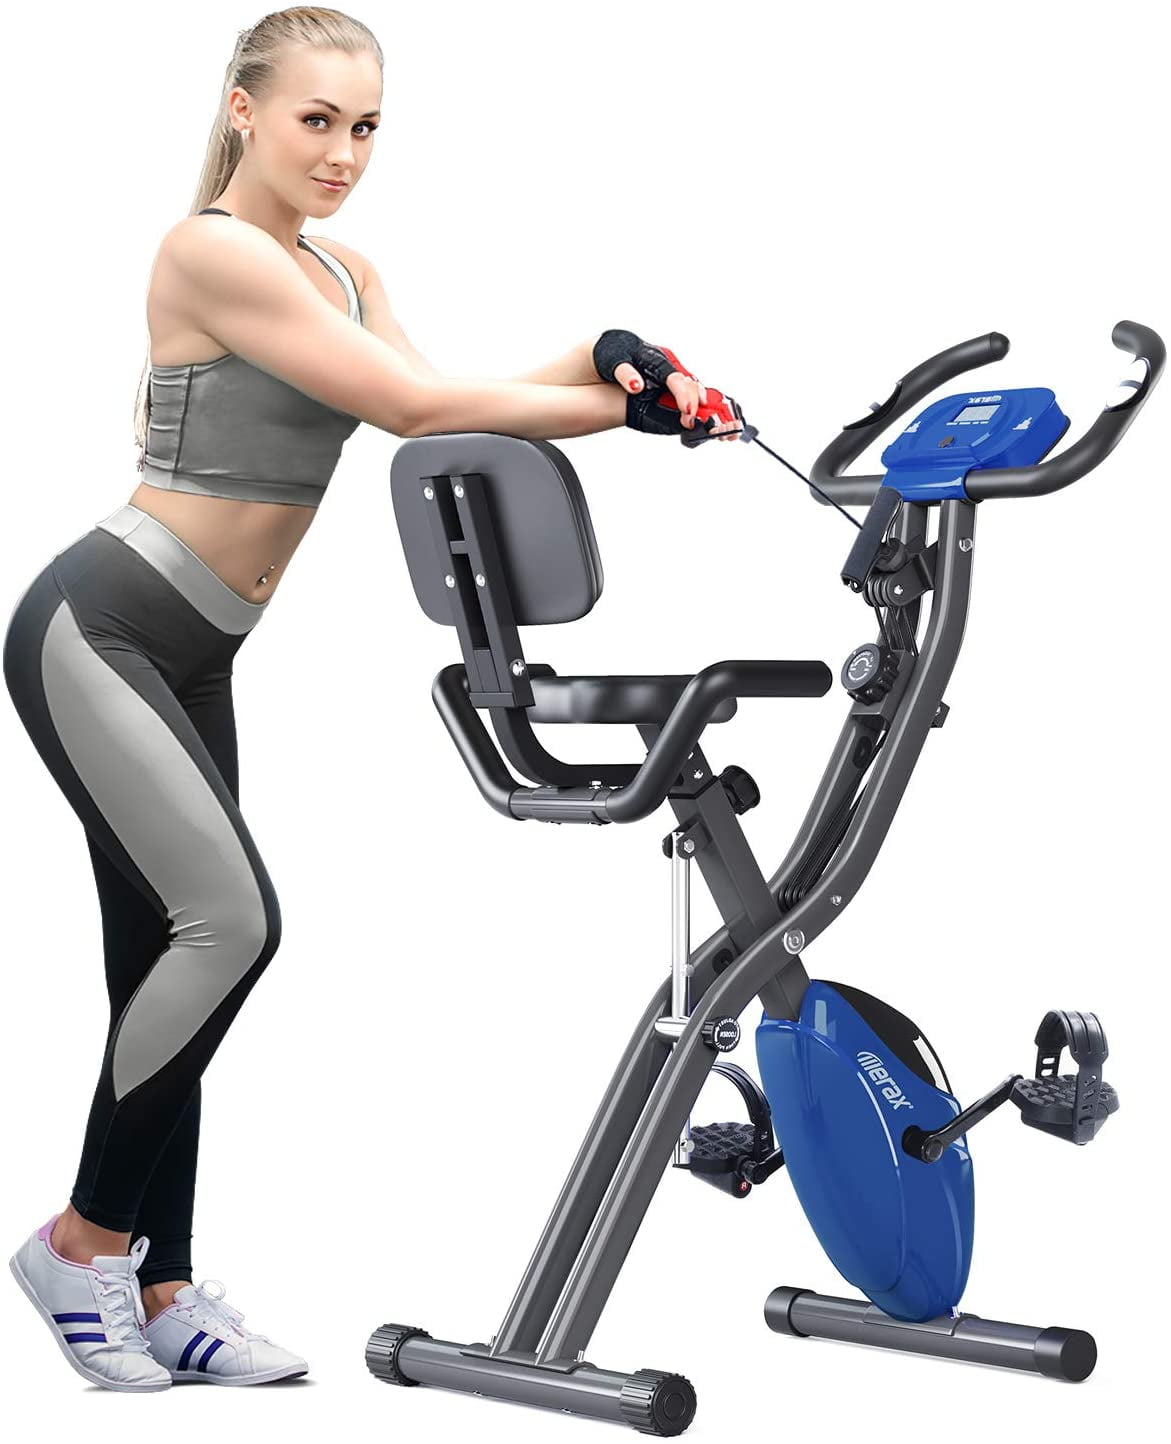 Segmart Folding Recumbent 3-in-1 Compact Stationary Exercise Bike with  Adjustable Arm Resistance Bands, LCD Monitor, Tablet Holder, High Backrest,  Holds 350 Lbs.